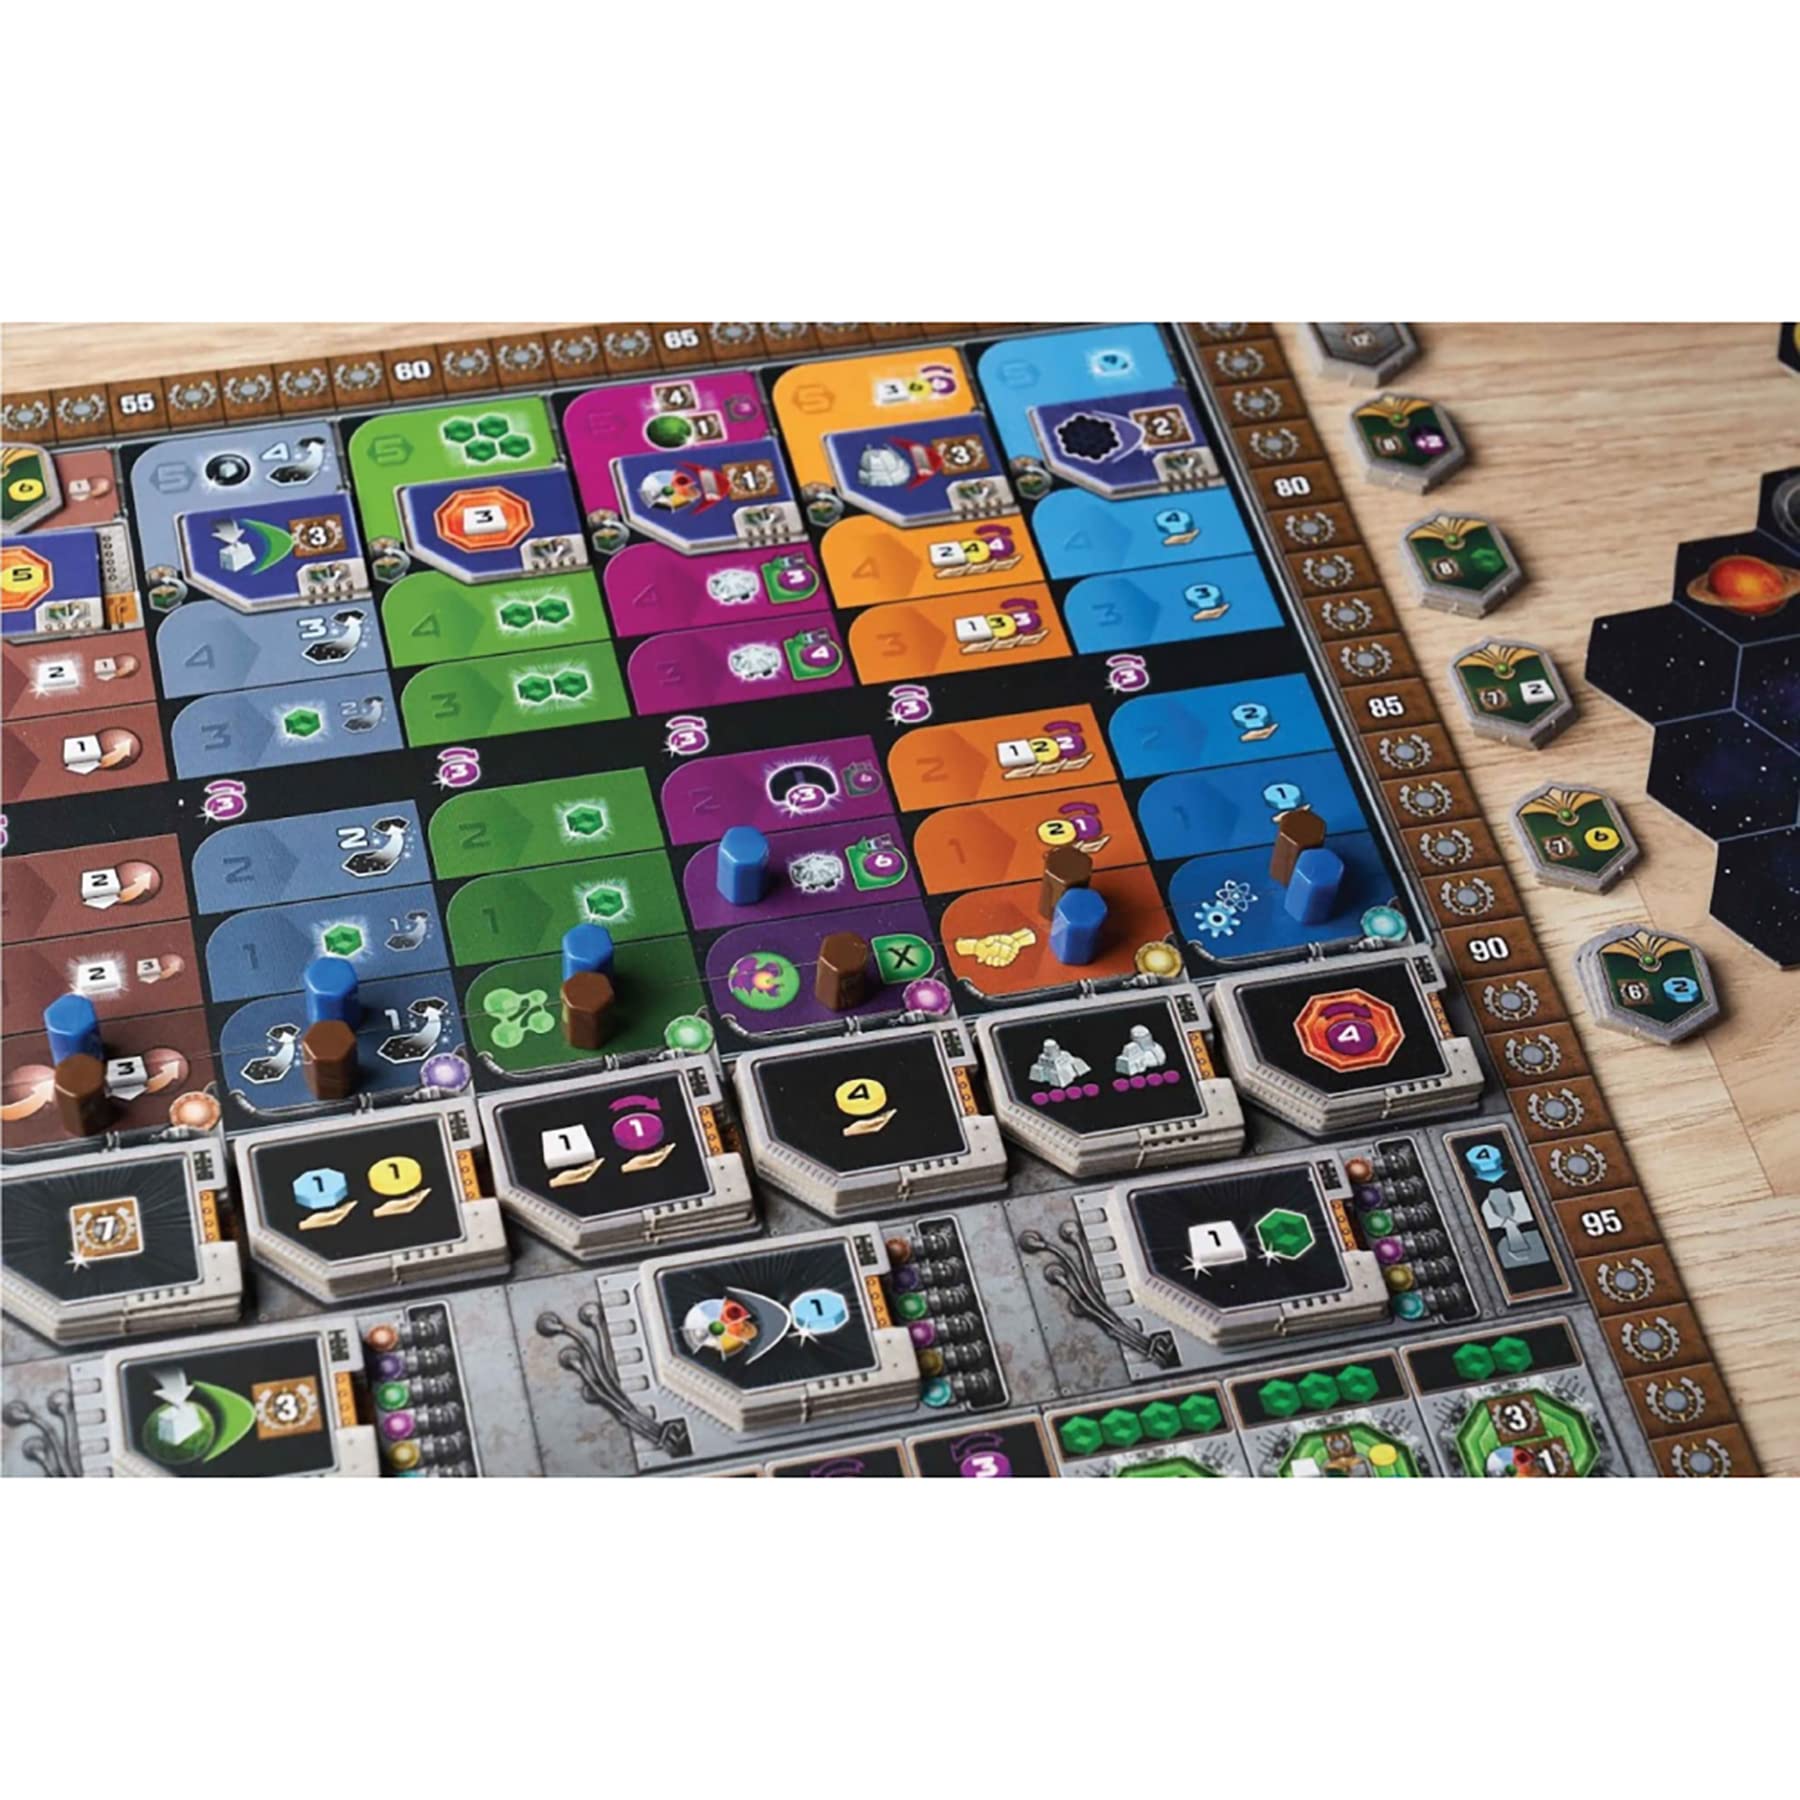 Capstone Games: Gaia Project, Strategy Board Game, A Follow Up Game From Terra Mystica, Includes a Challenging Solo Mode, 1 to 5 Players, Ages 14 and Up